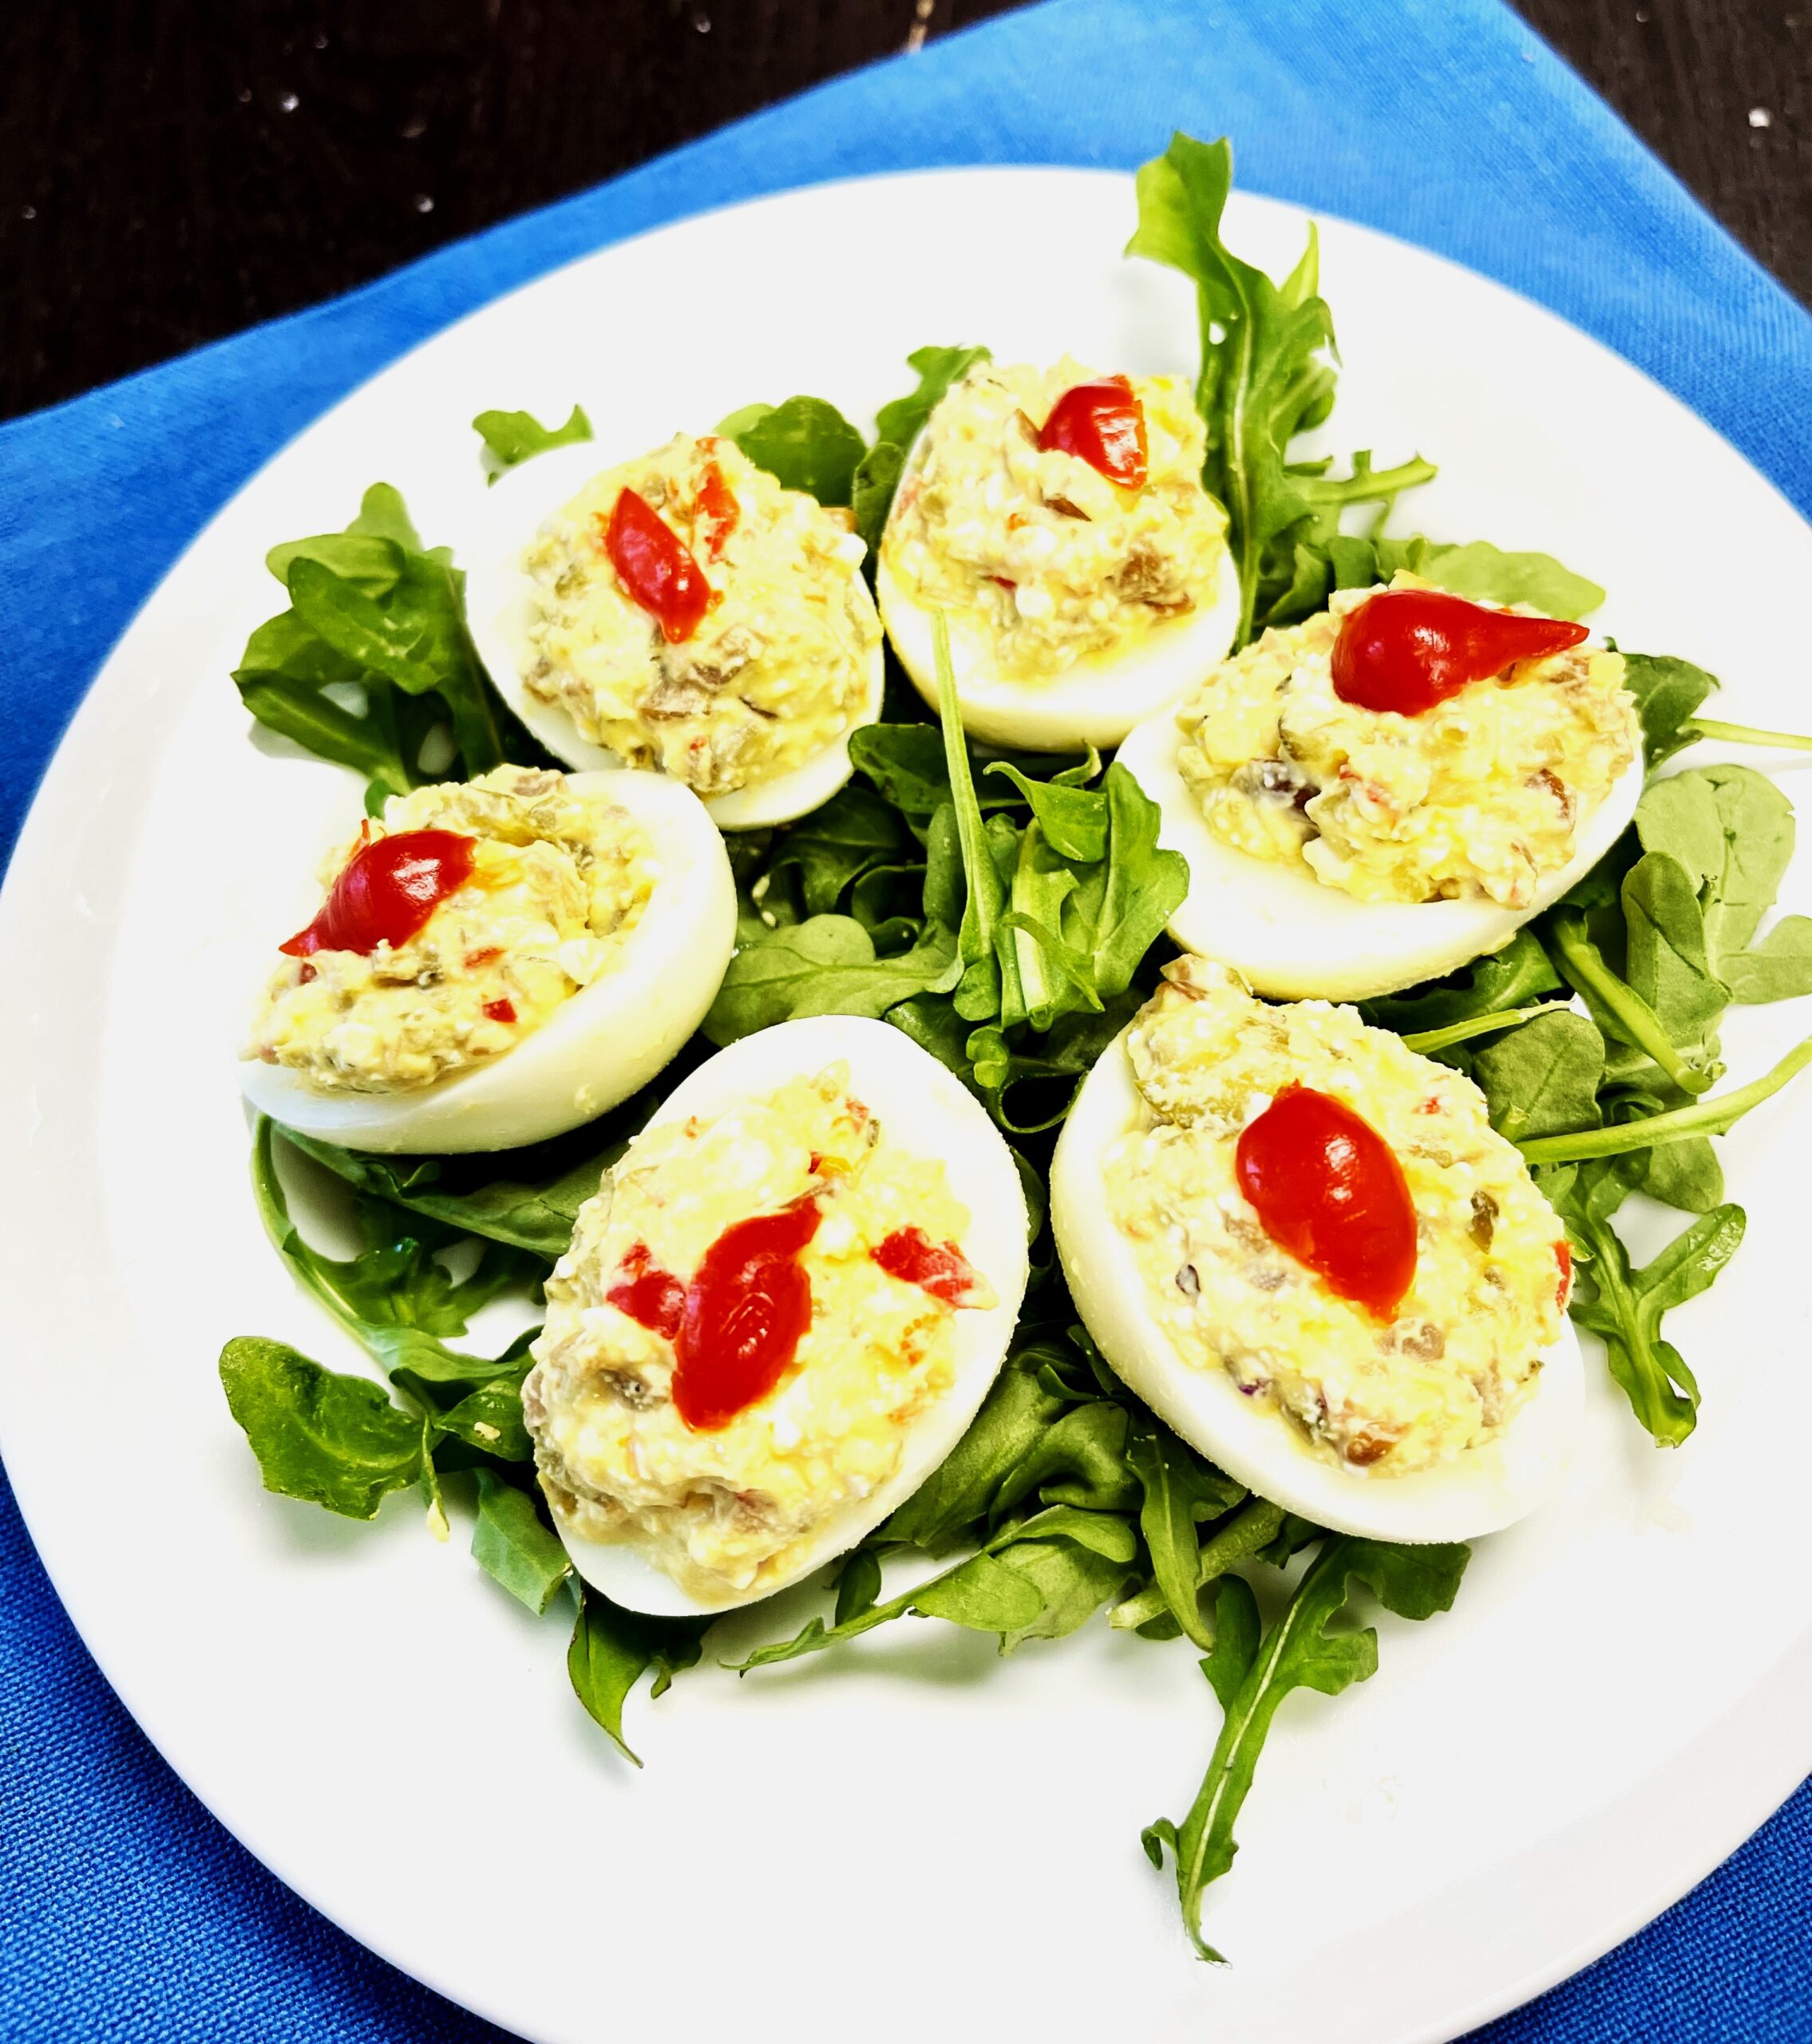 Deviled eggs made with cornichons, marinated peppers, mushrooms and olives. Six in a circle atop bed of arugula greens.